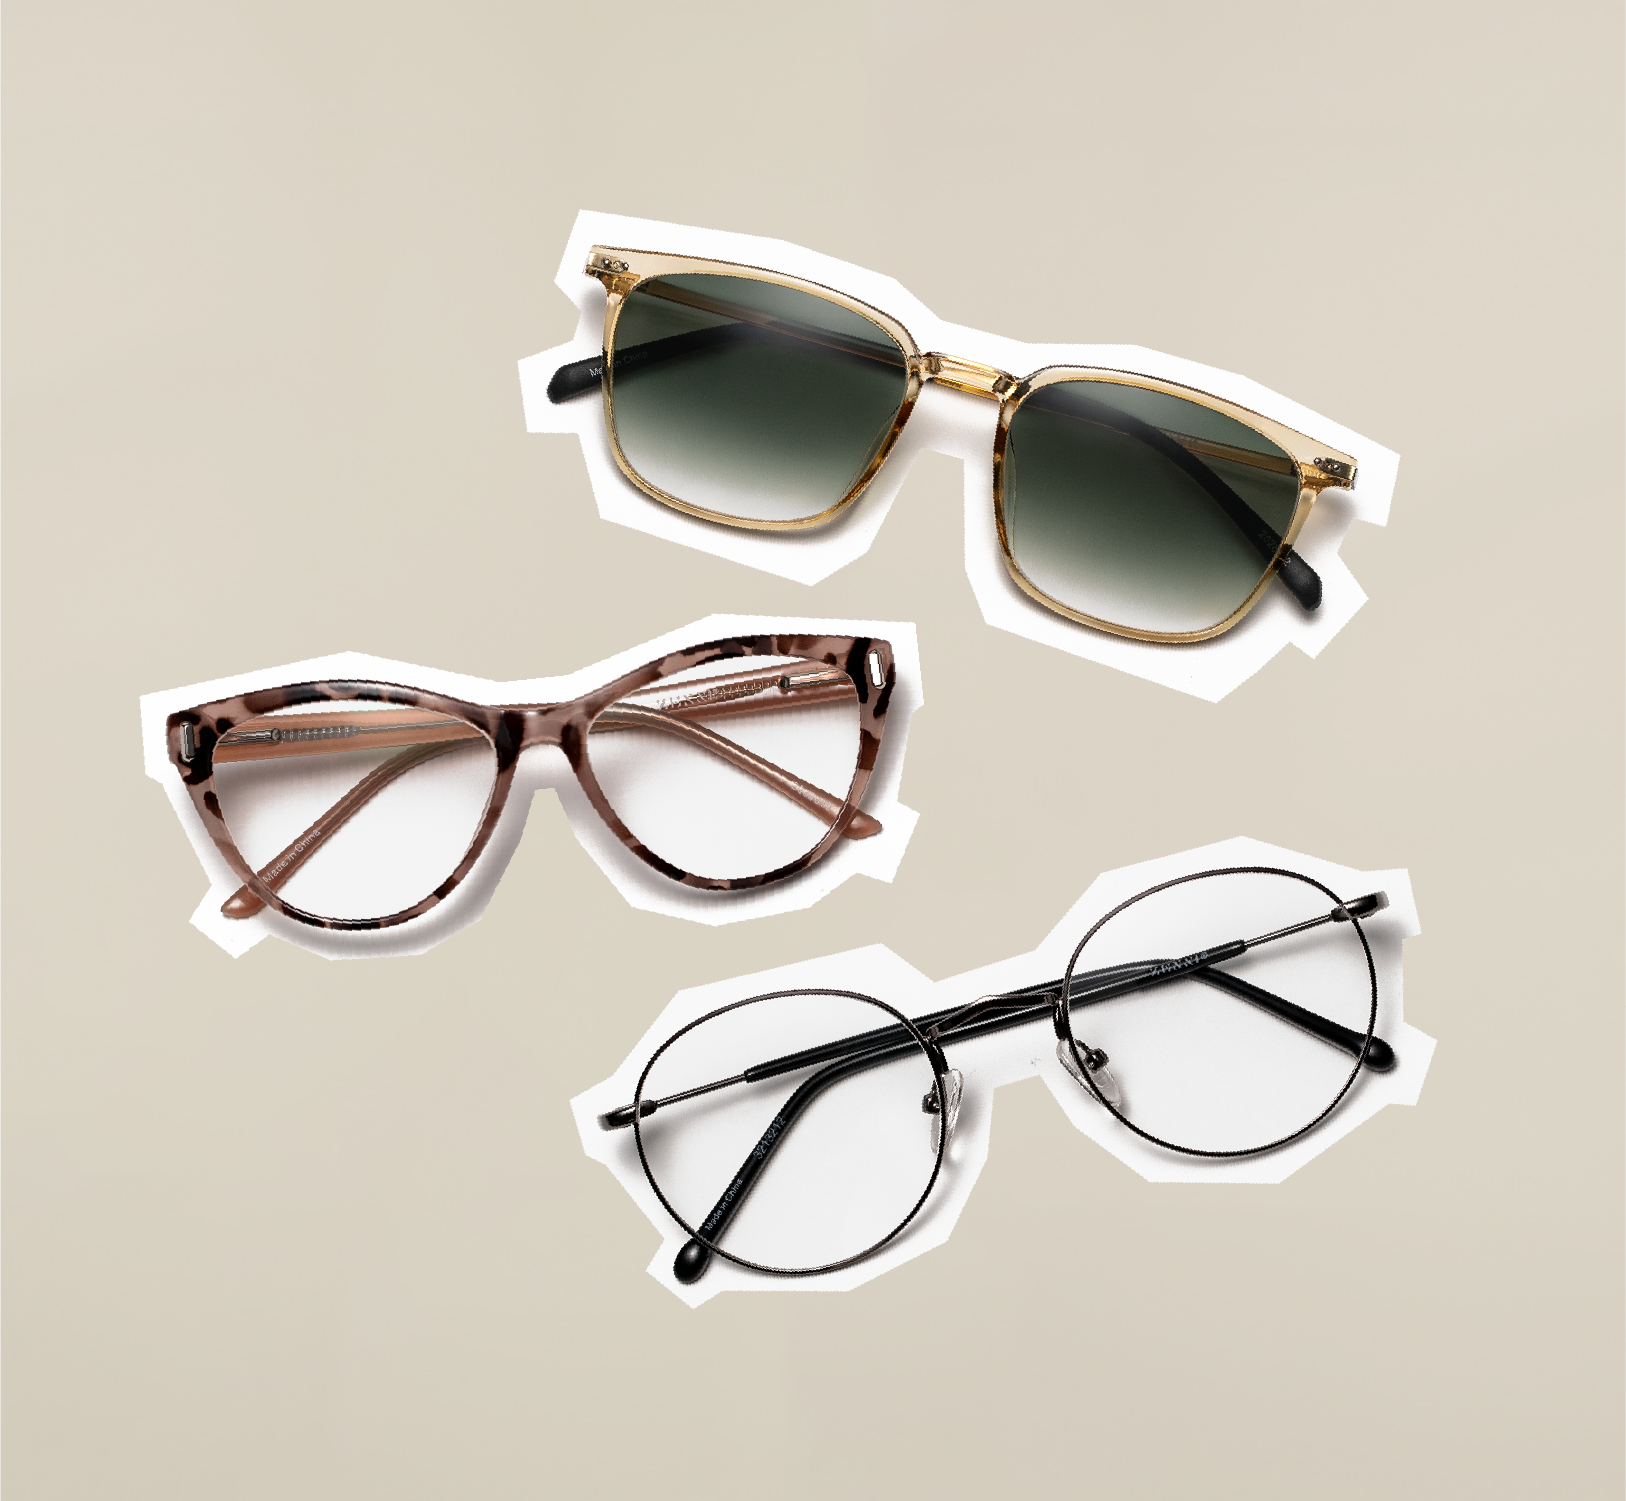 A lay-down display cutout of Zenni cateye glasses, round glasses, and square sunglasses.